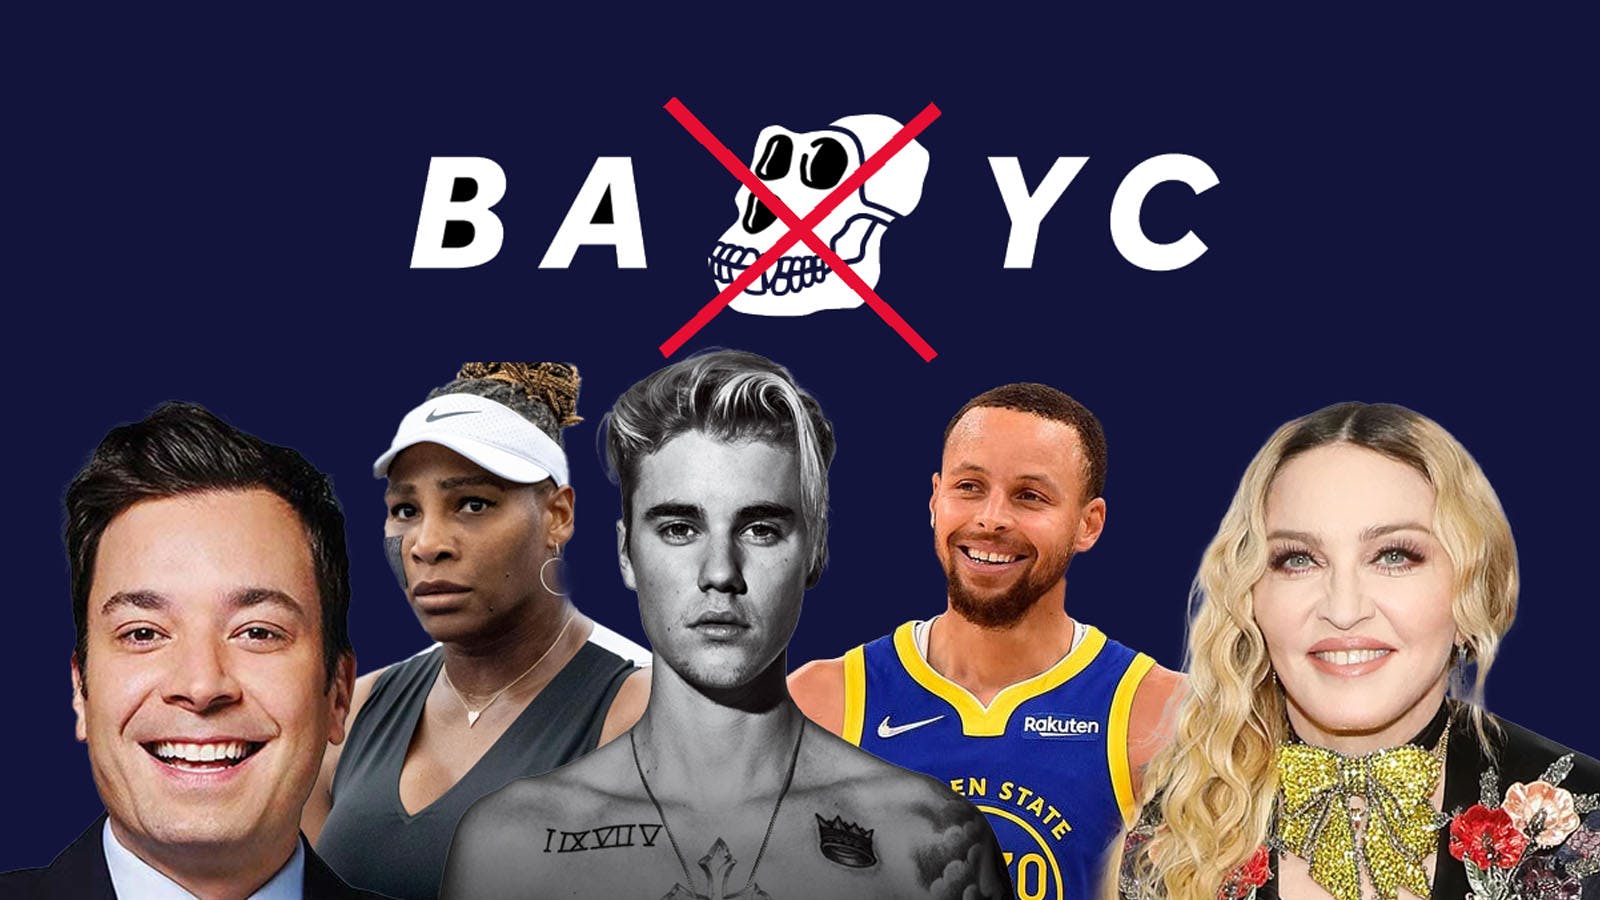 Every Celebrity Being Sued For Promoting BAYC